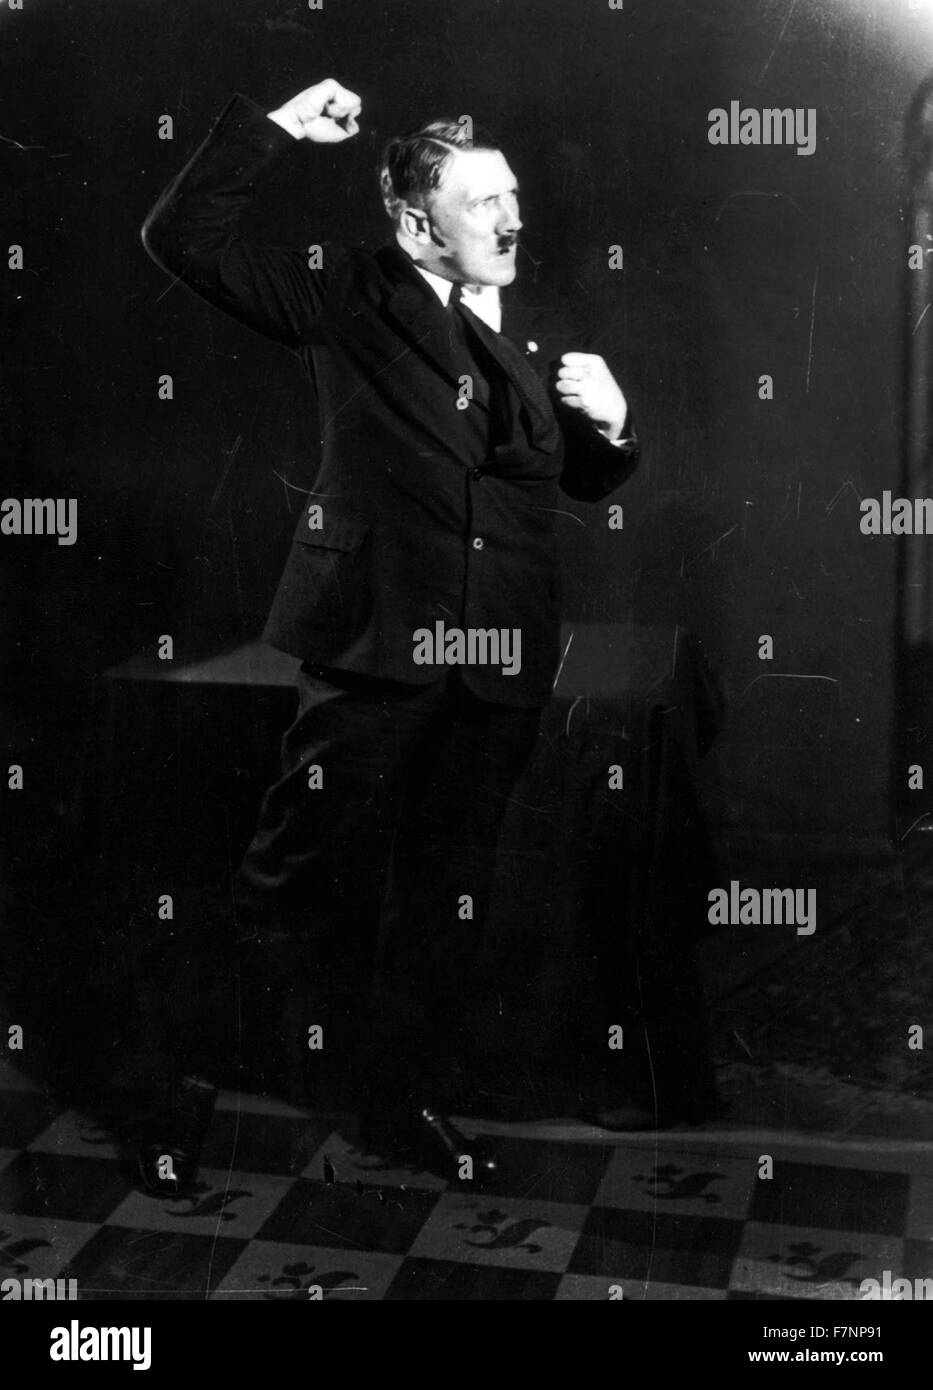 German Nazi leader Adolf Hitler, rehearsing a speech in front of the mirror 1933 Stock Photo